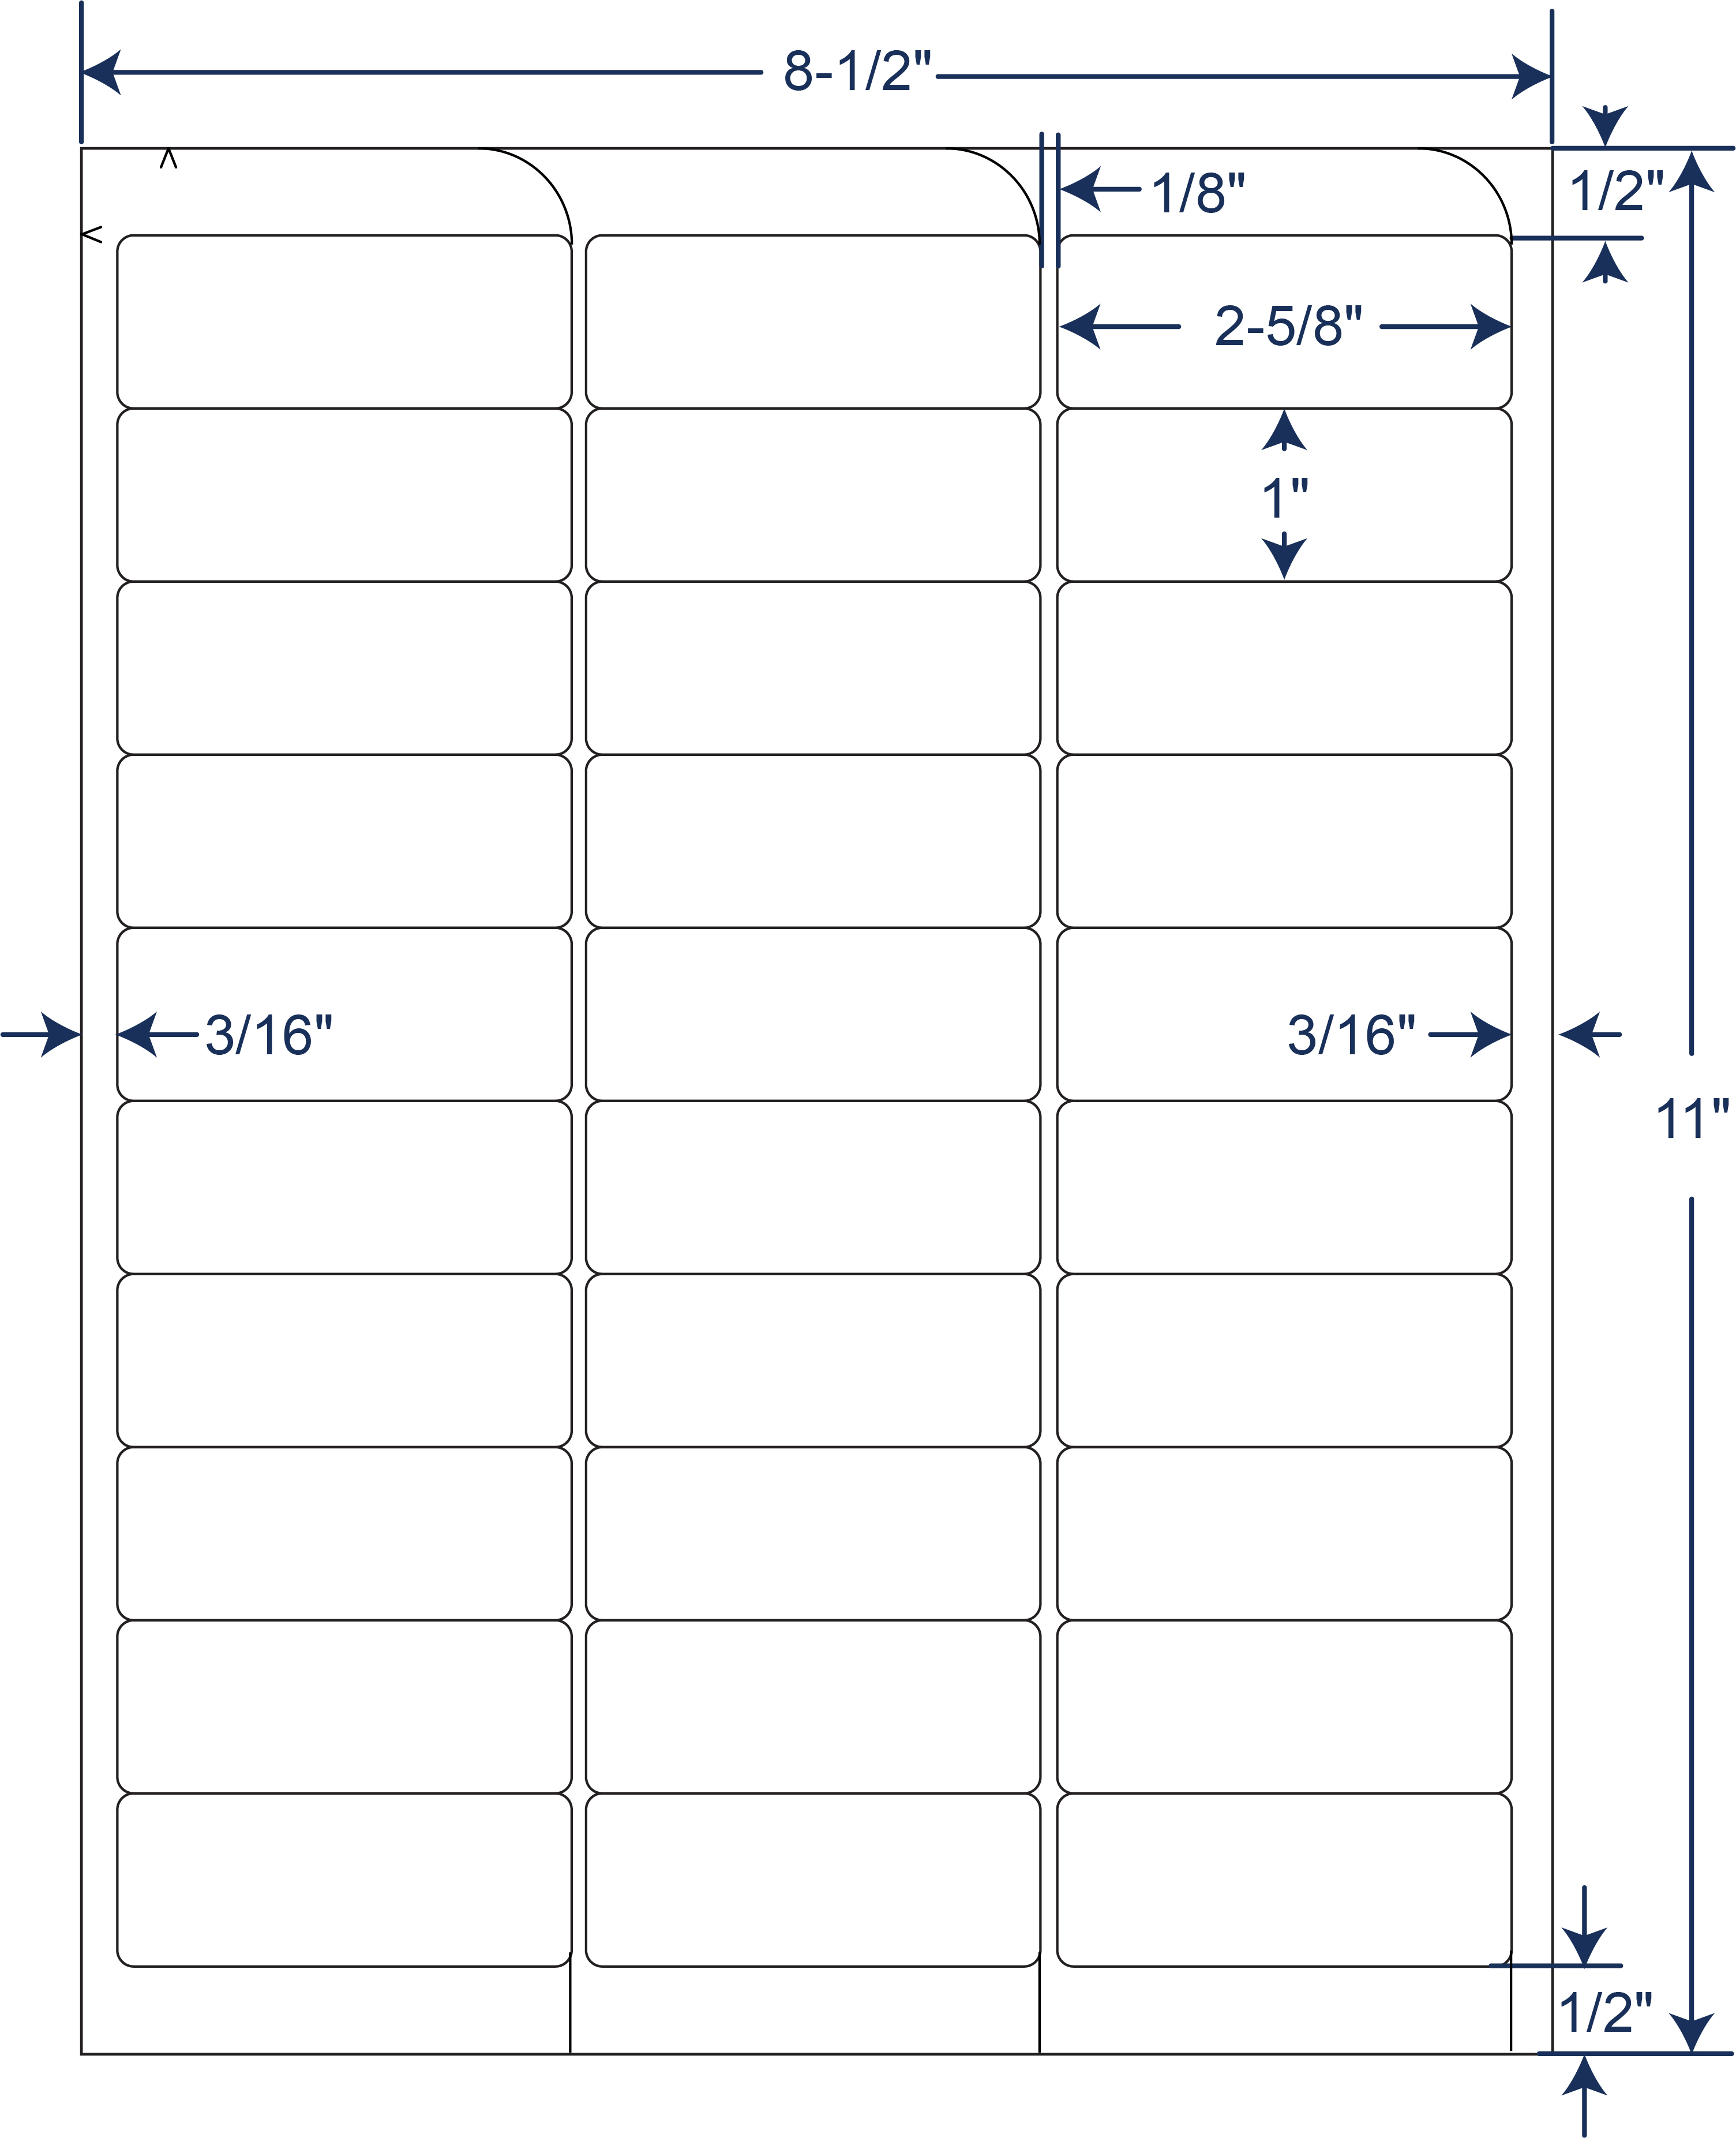 0-5-x-0-9375-under-1-rectangle-labels-10-sheets-1190-total-119-per-sheet-blank-labels-office